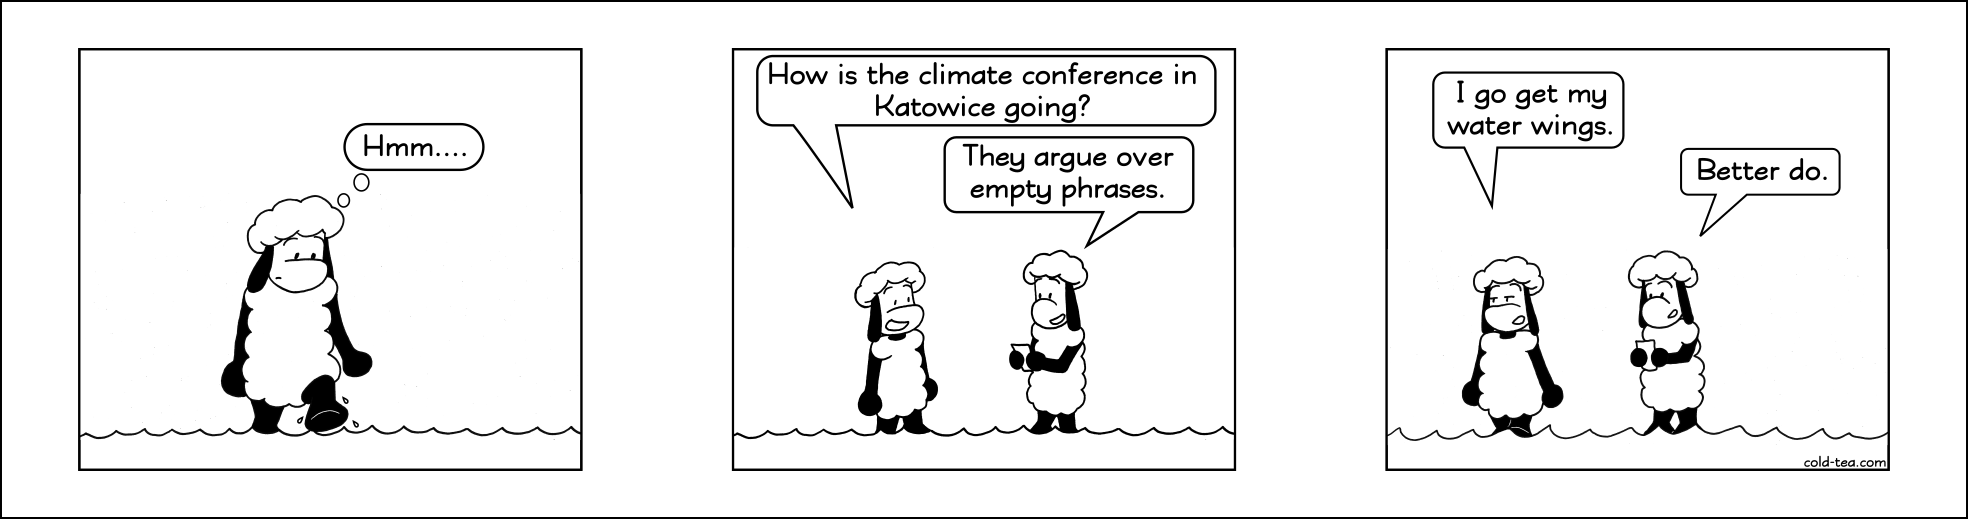 climate conference